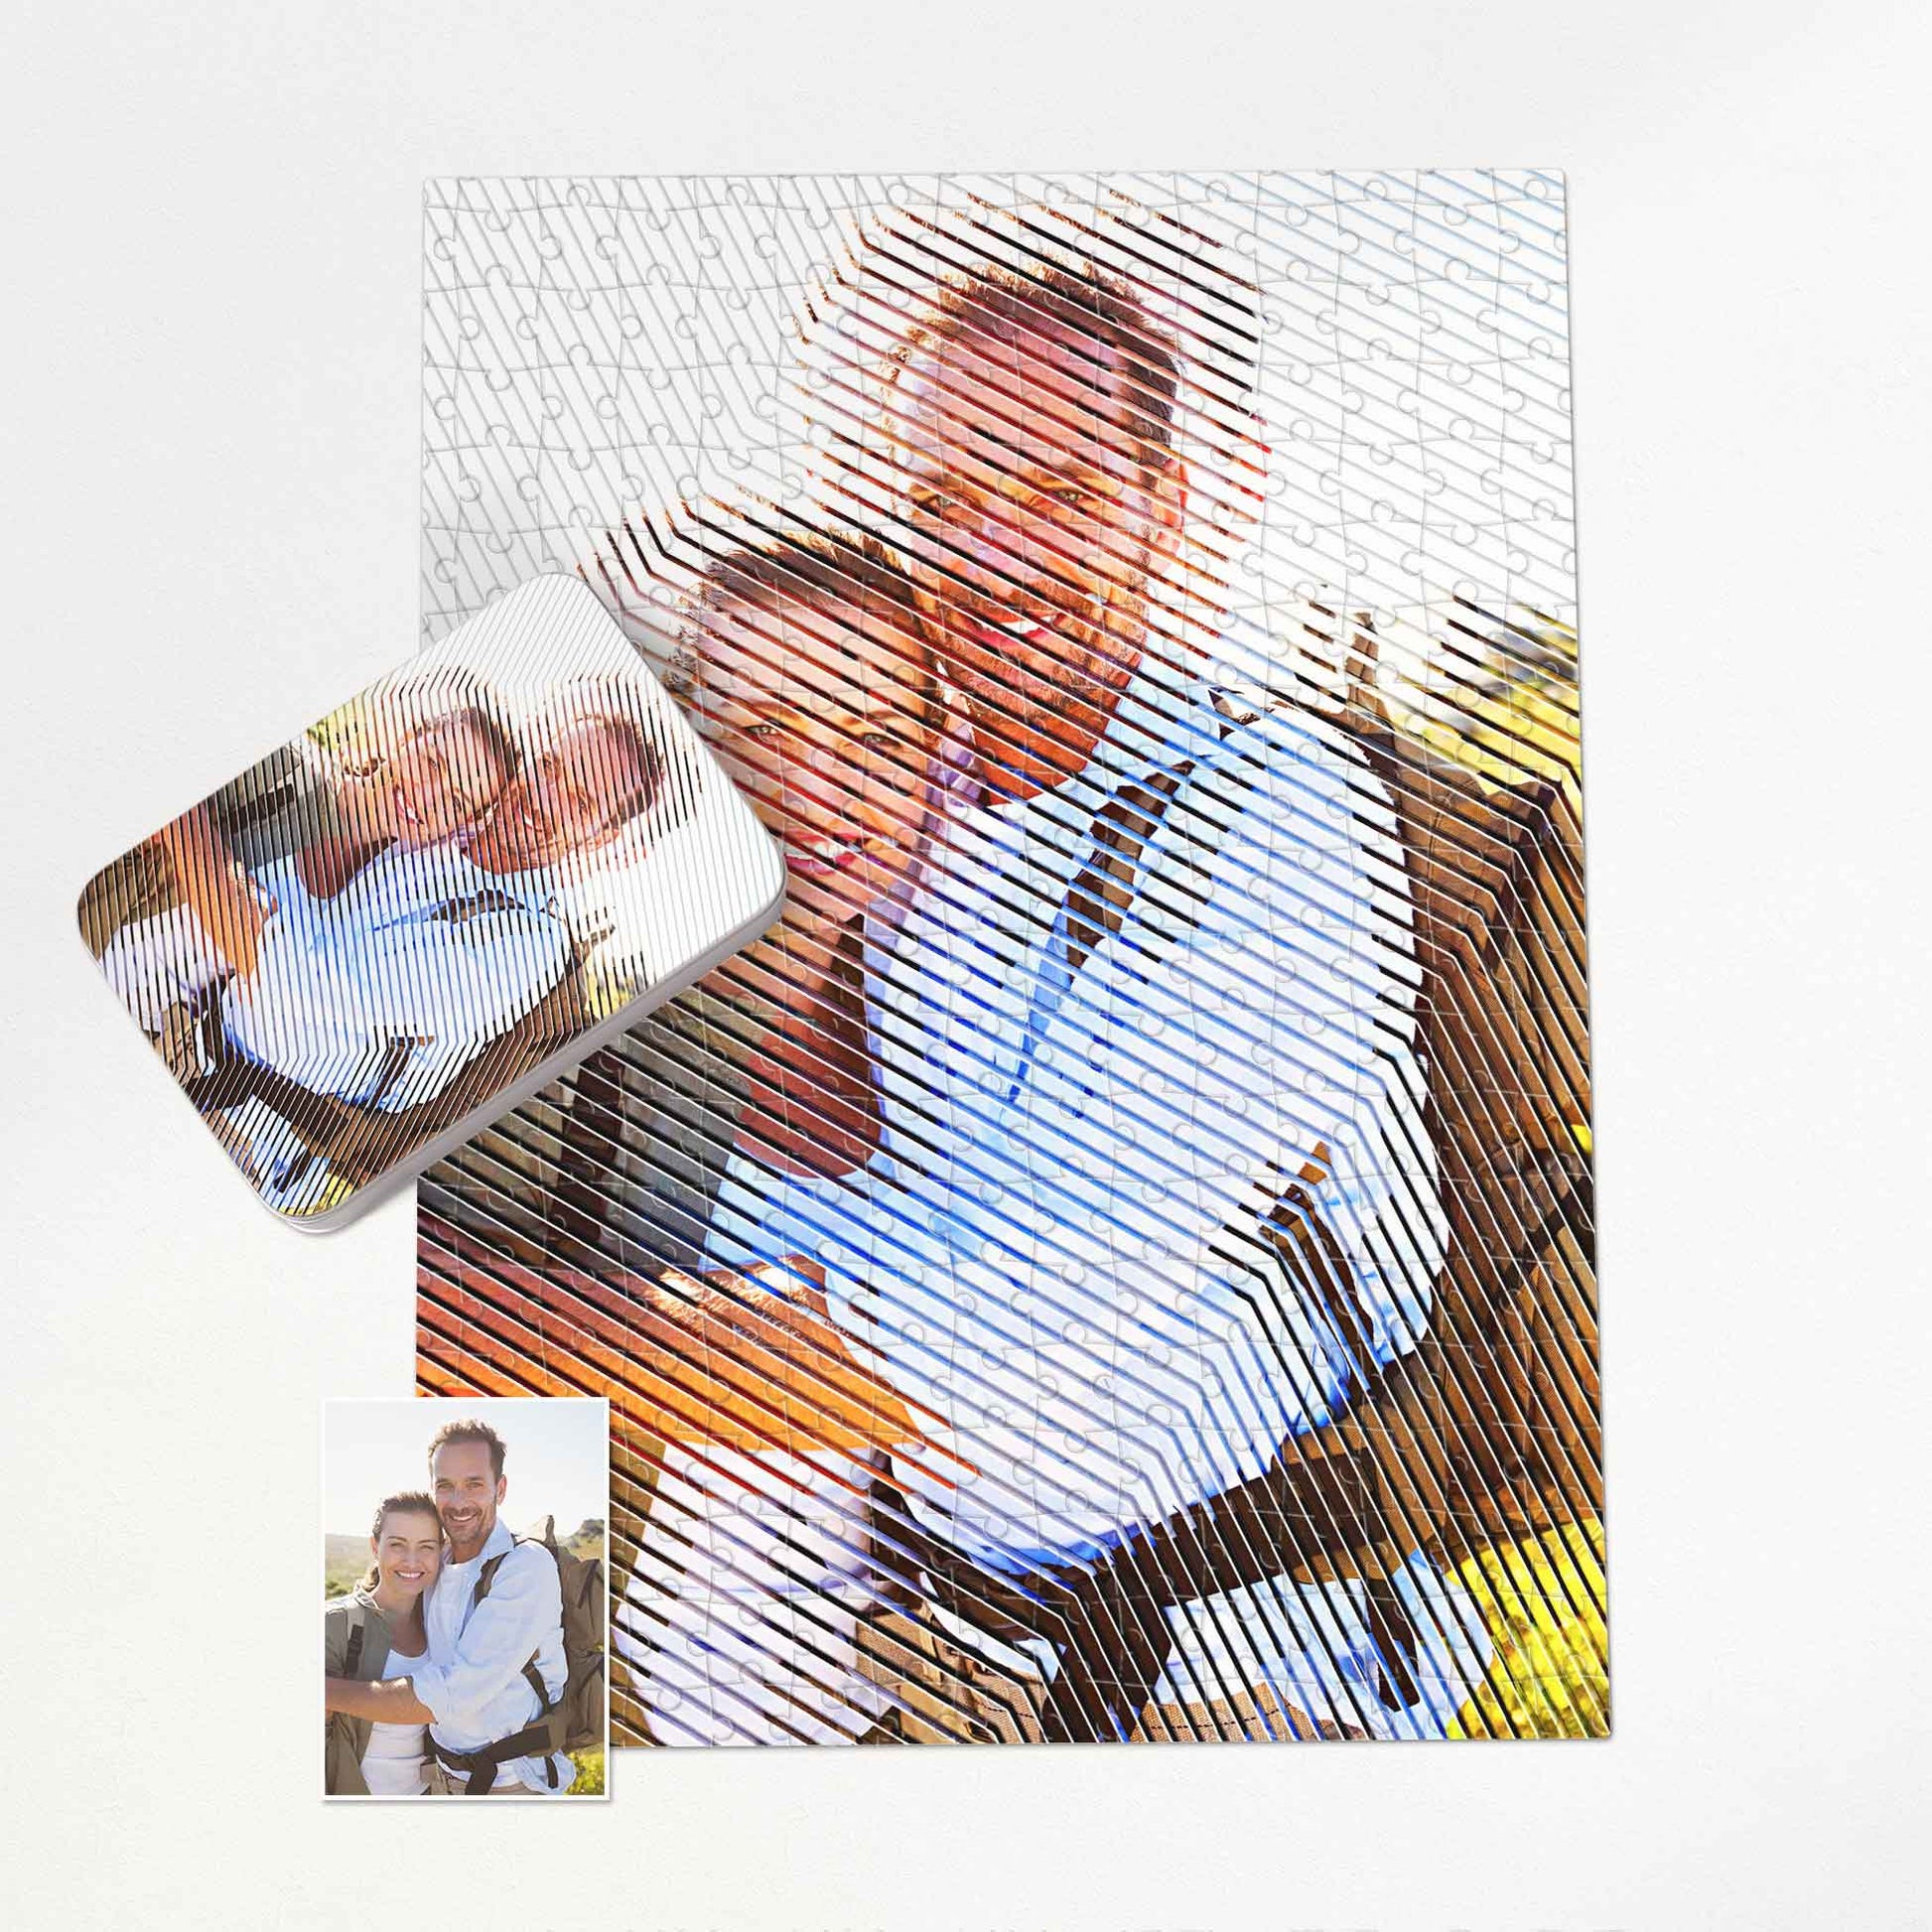 Personalised Abstract Lines Jigsaw Puzzle, featuring a modern abstract print from photo. The vivid, sharp image comes alive on handmade wooden or cardboard pieces, making it a cool and unique gift idea for celebrations and special occasions